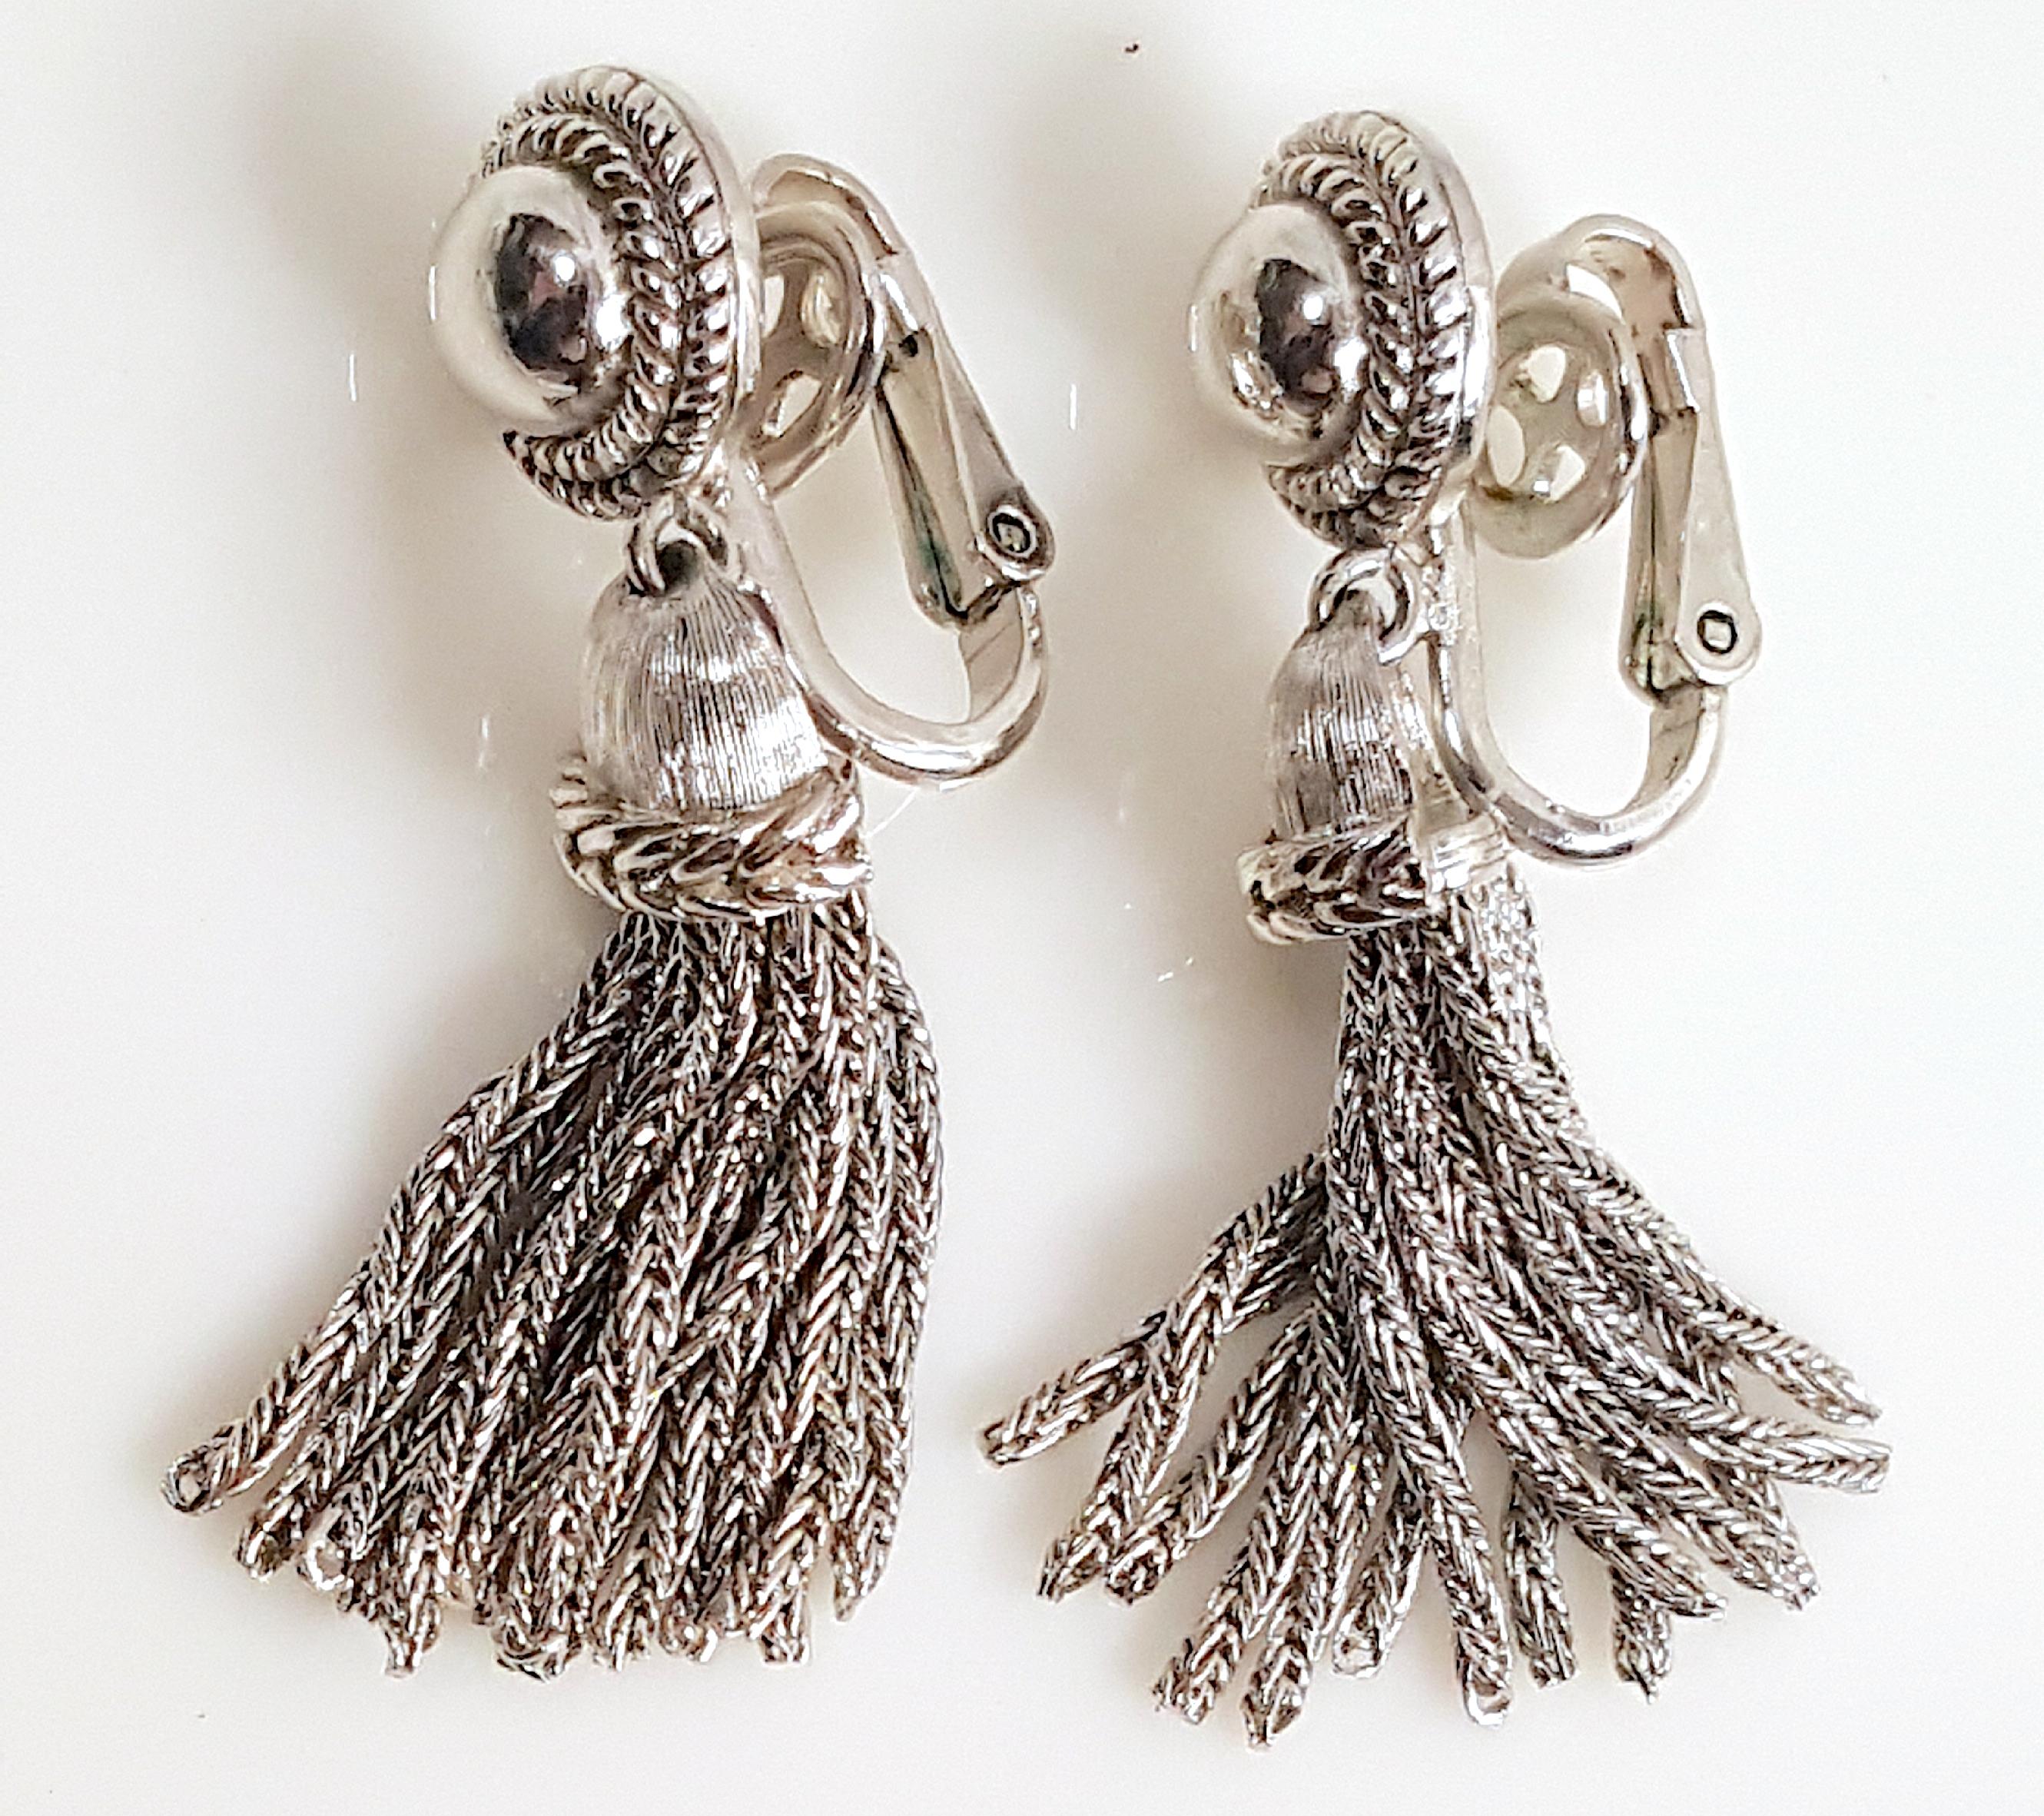 These mid-century platinum-like silver tassel chain drop earrings were designed by Trifari artistic director Alfred Philippe in an Art Deco style that recalls his earlier work for Cartier and Van Cleef & Arpels. The earrings are signed on the back